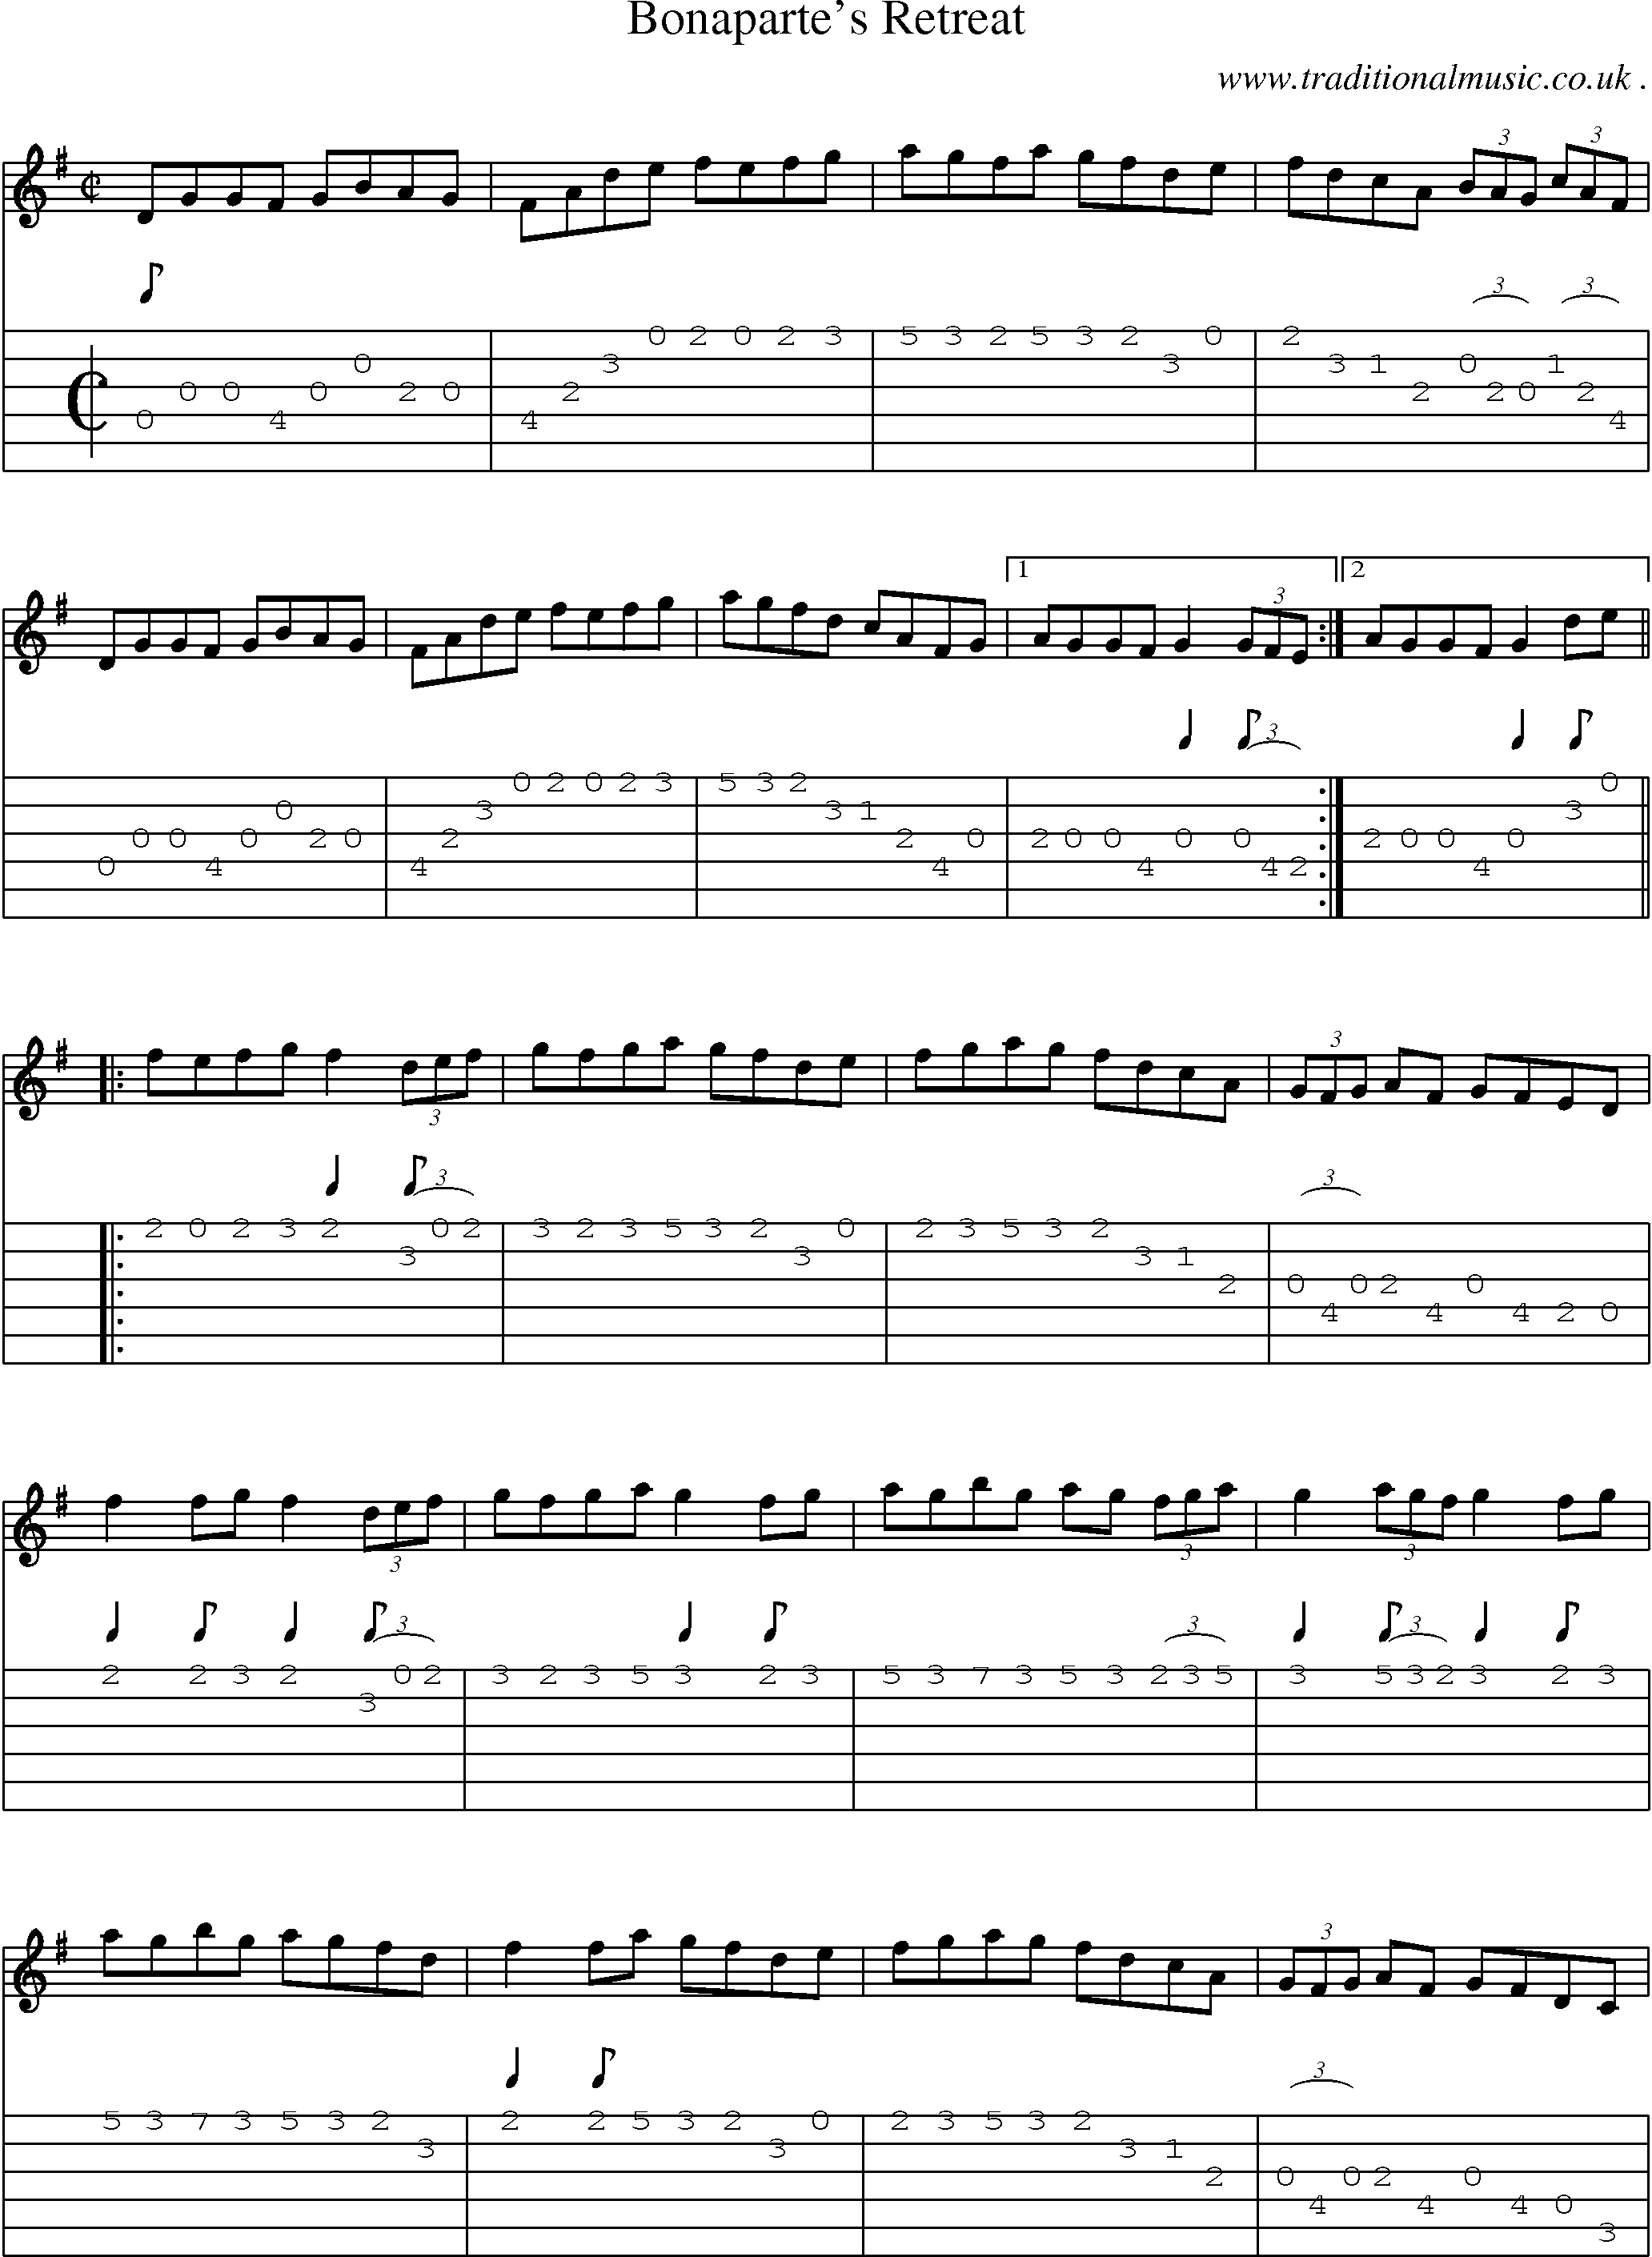 Sheet-Music and Guitar Tabs for Bonapartes Retreat